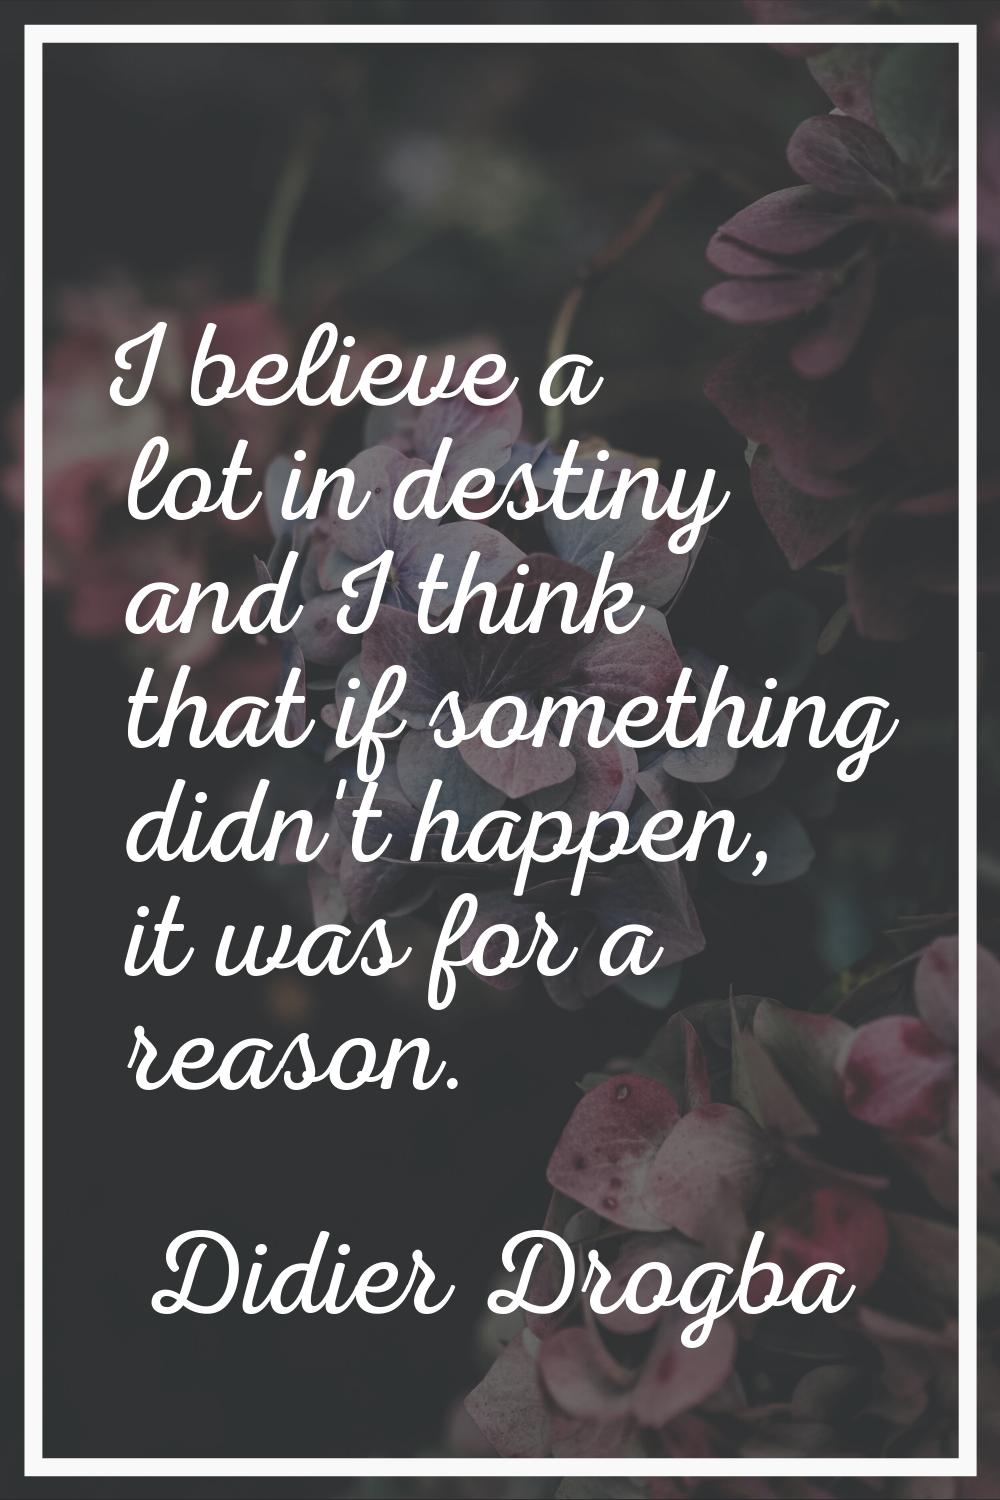 I believe a lot in destiny and I think that if something didn't happen, it was for a reason.